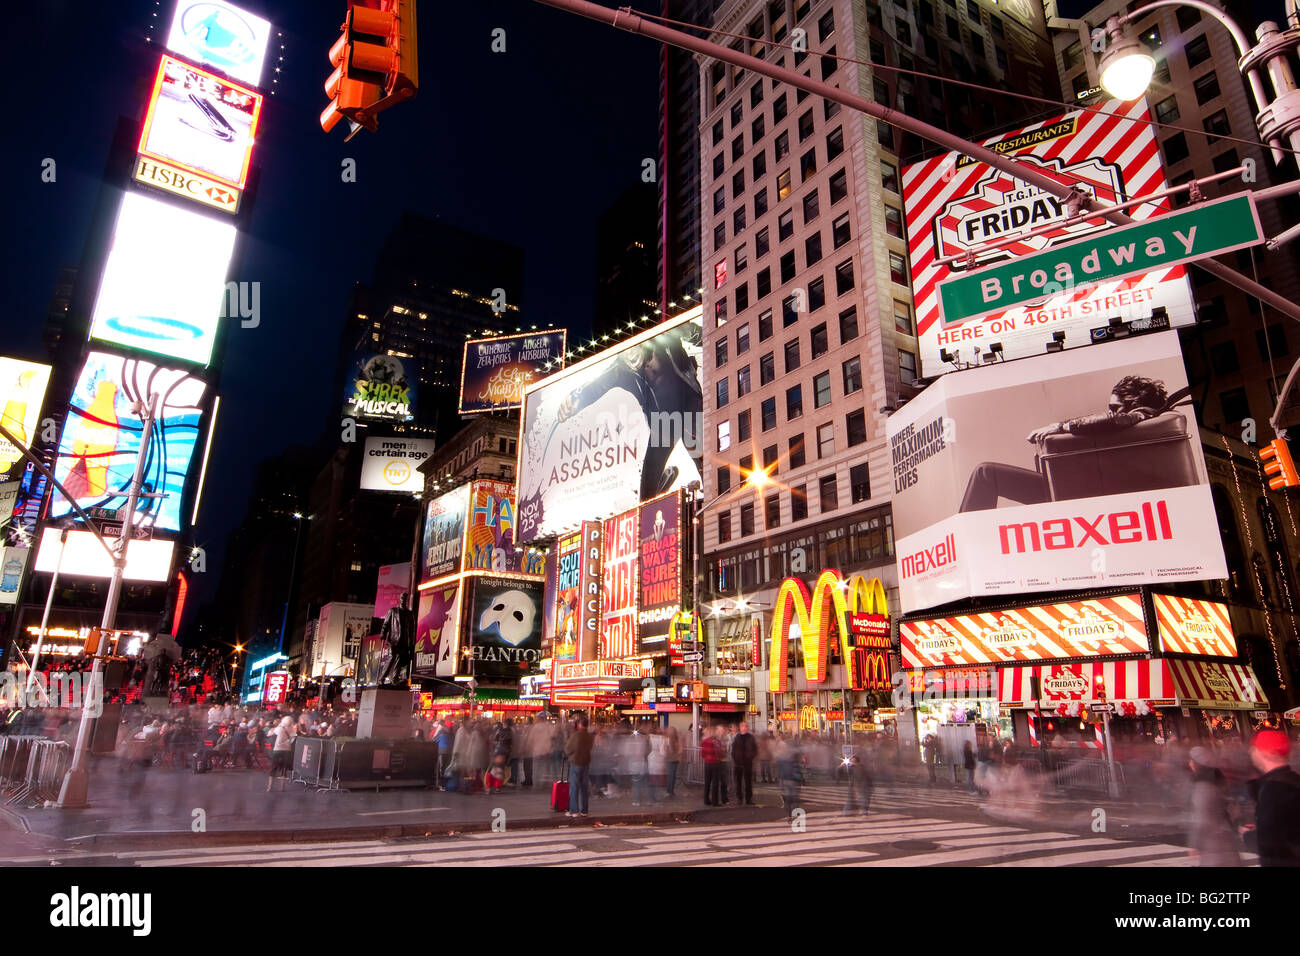 Night scene of Broadway at Times Square in Manhattan (New York City) with all the lit up billboards and advertisements. Stock Photo